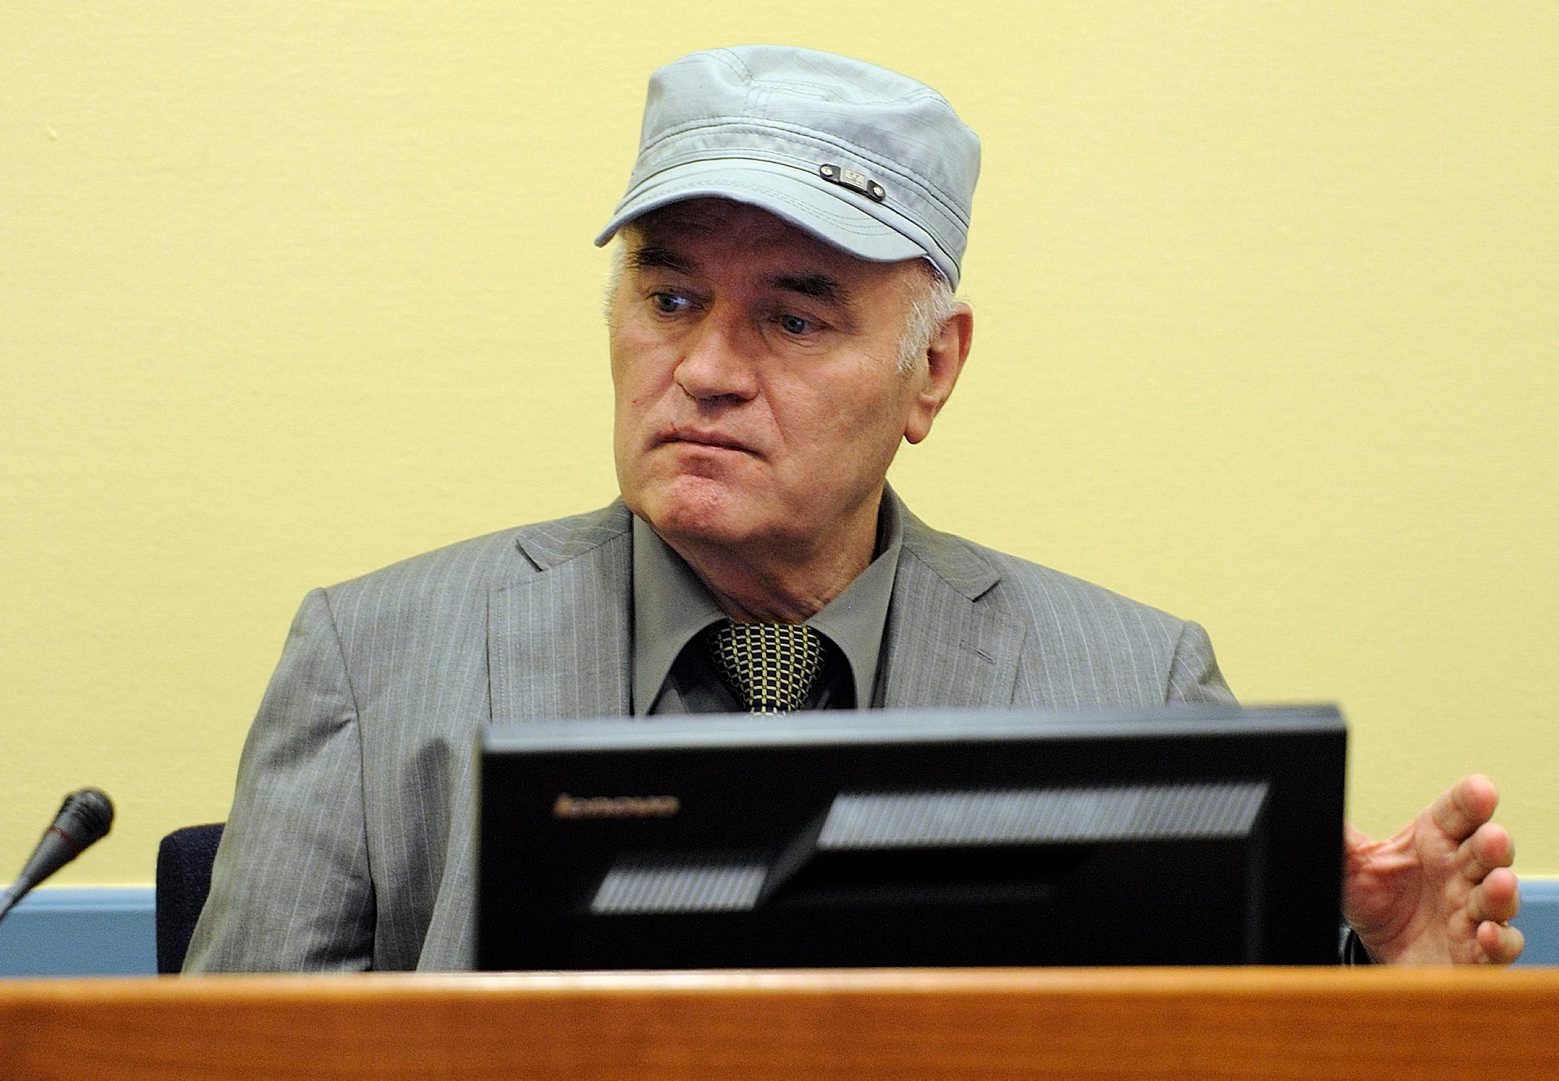 Former Bosnian Serb Gen. Ratko Mladic sits in the court room during his initial appearance at the U.N.'s Yugoslav war crimes tribunal in The Hague, Netherlands, Friday, June 3, 2011. Mladic's appearance Friday at the Yugoslav war crimes tribunal in The Hague is his first public appearance since he went into hiding nearly 16 years ago, when he was indicted for genocide and war crimes committed in the 1992-95 Bosnian war. (AP Photo/ Martin Meissner, Pool) Netherlands War Crimes Mladic